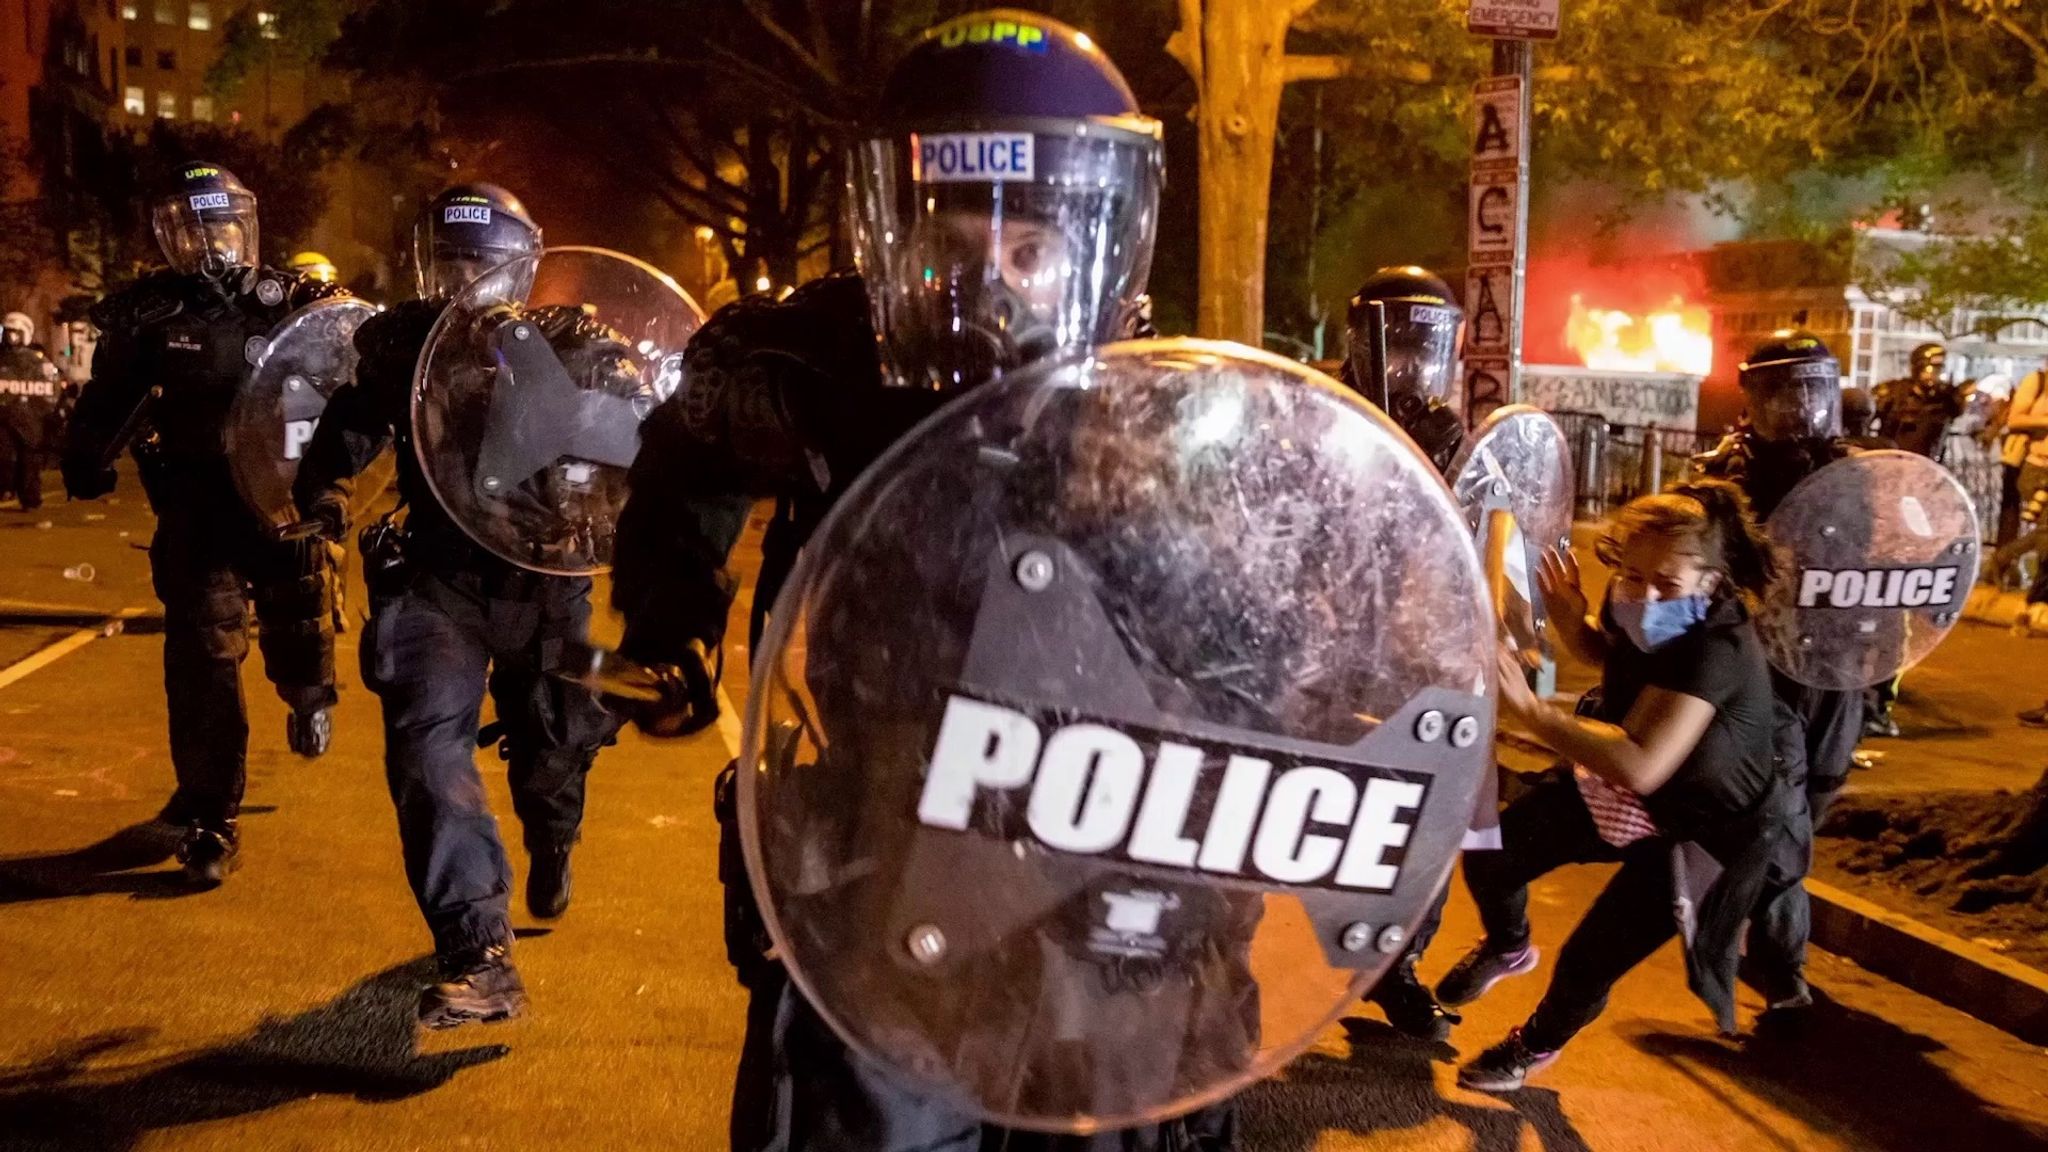 Sky News can reveal that riot shields used by US police have been made in the UK